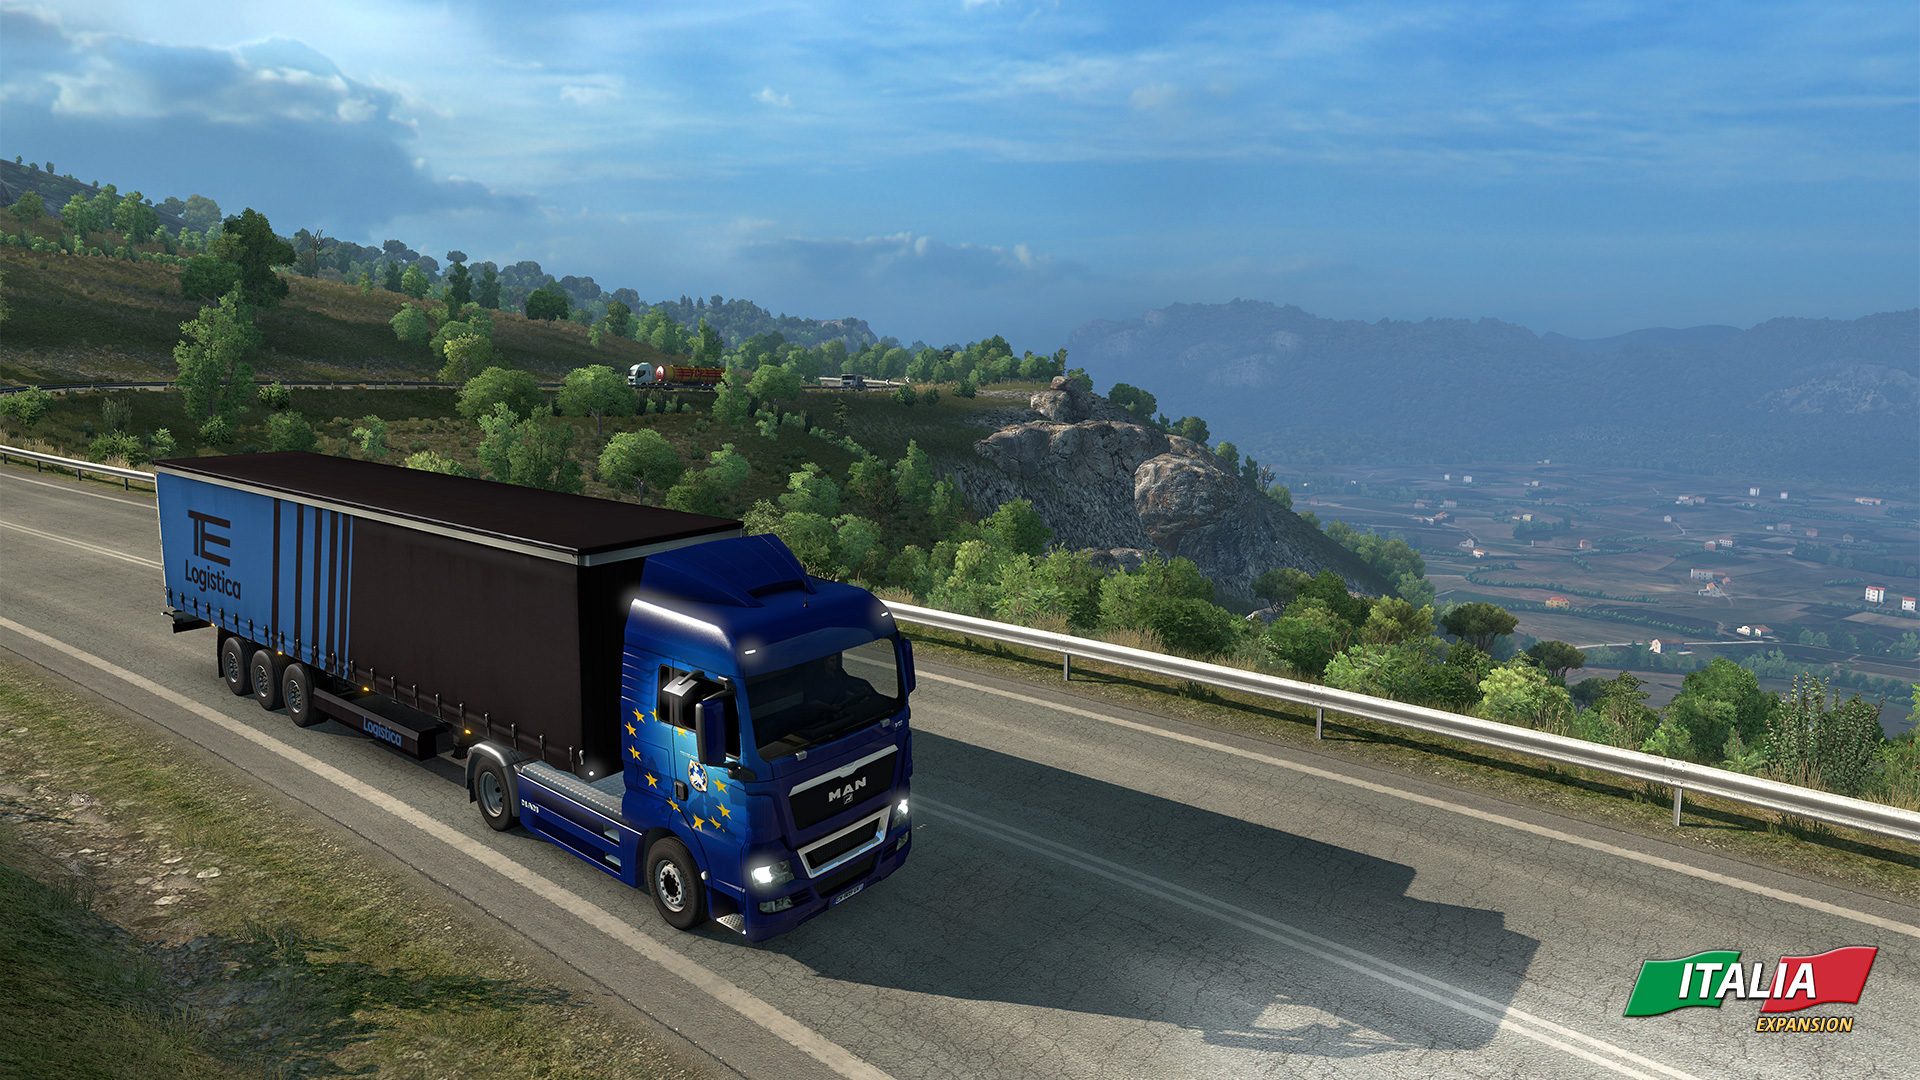 Euro Truck Simulator 2, The Crew 2 Top Steam's Top Sellers of 2018